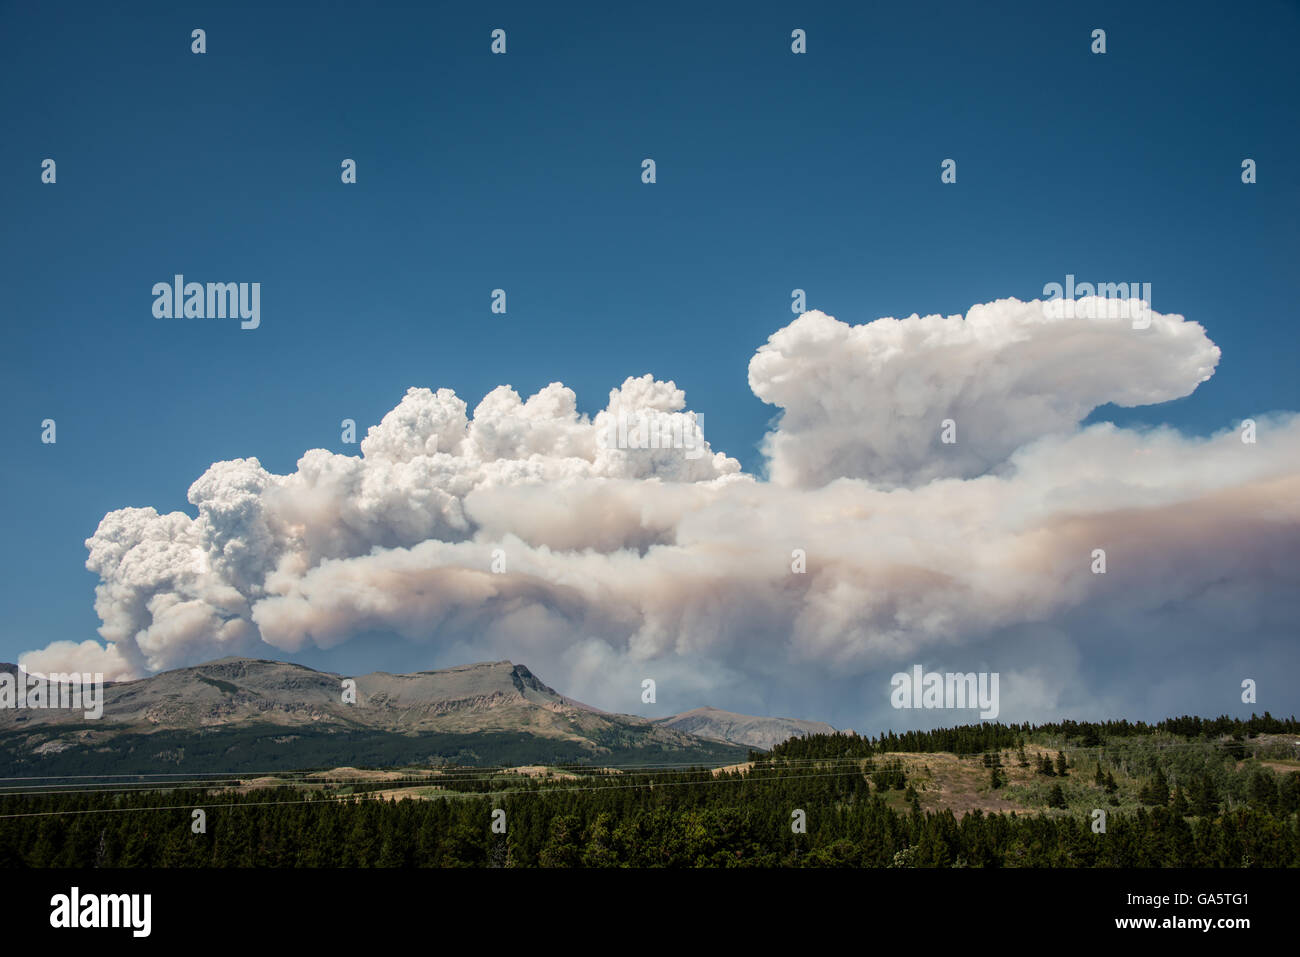 Smoke rises from a forest fire in Glacier National Park, Montana. Stock Photo